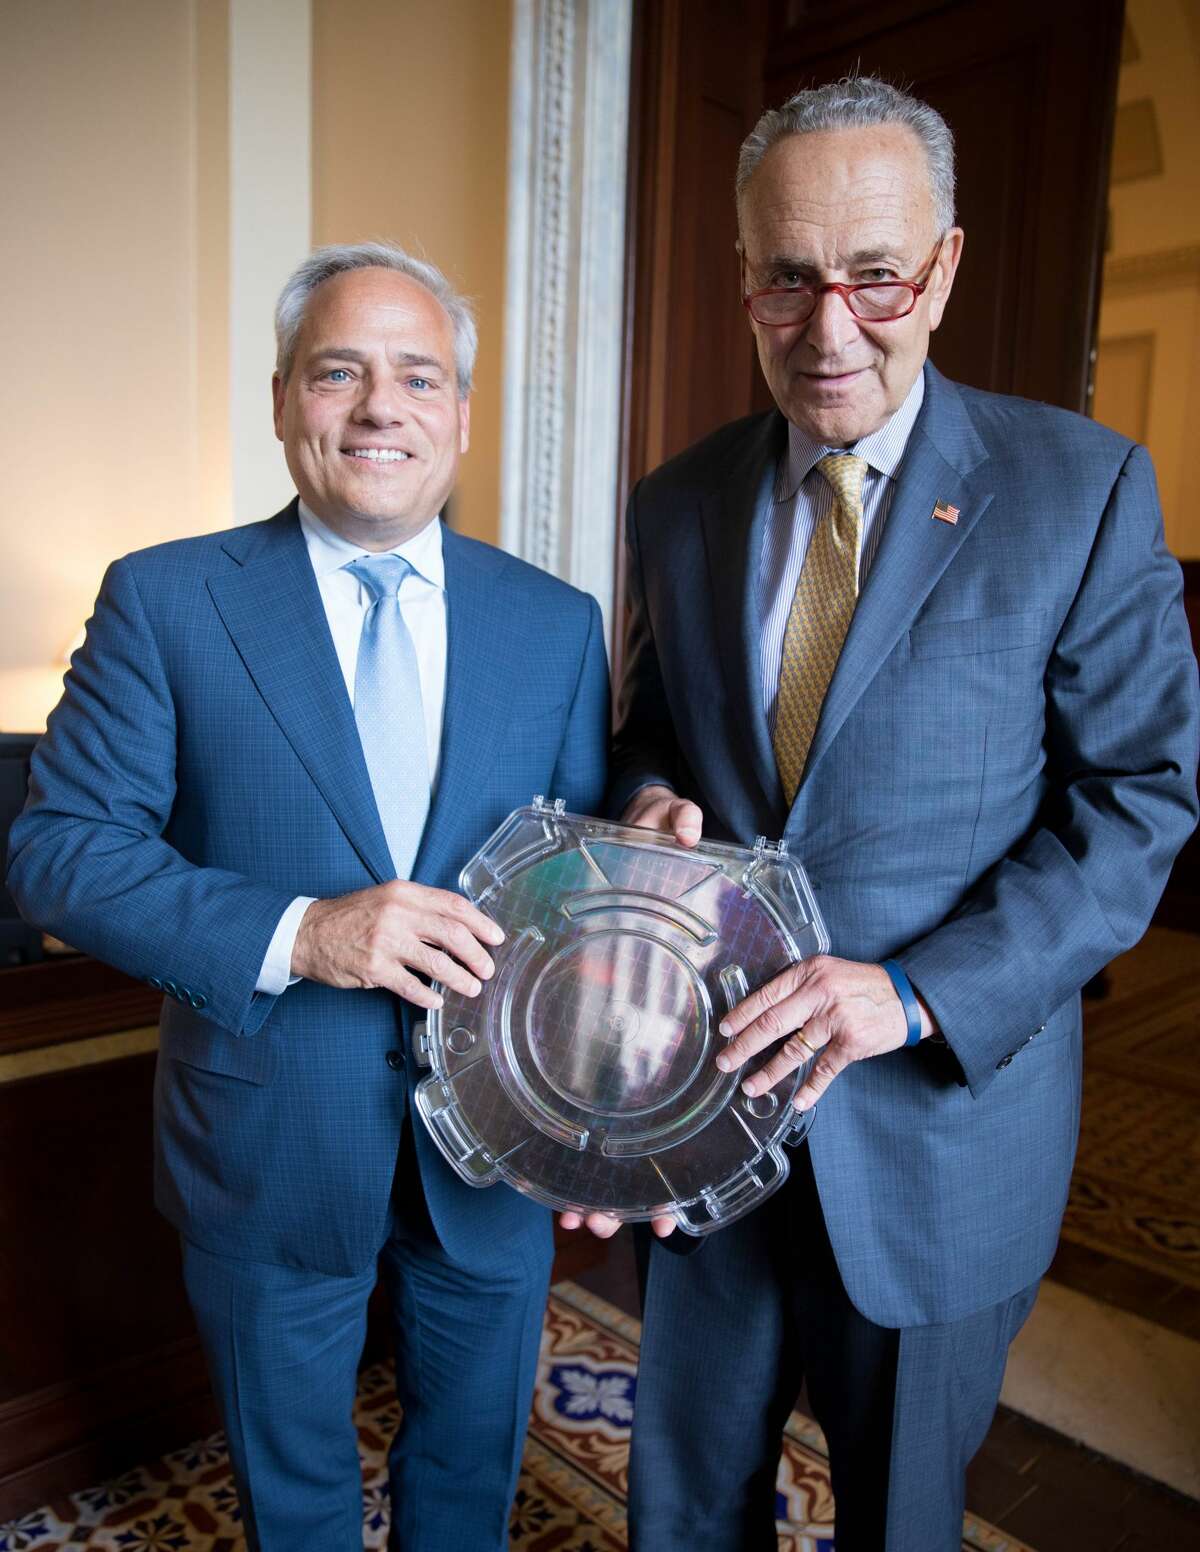 U.S. Sen. Charles Schumer met Tuesday, Sept. 17, 2019, with GlobalFoundries CEO Tom Caulfield. Schumer said he was told that the computer chip maker is "optimistic" about job growth at the company's Fab 8 factory in Malta, N.Y.